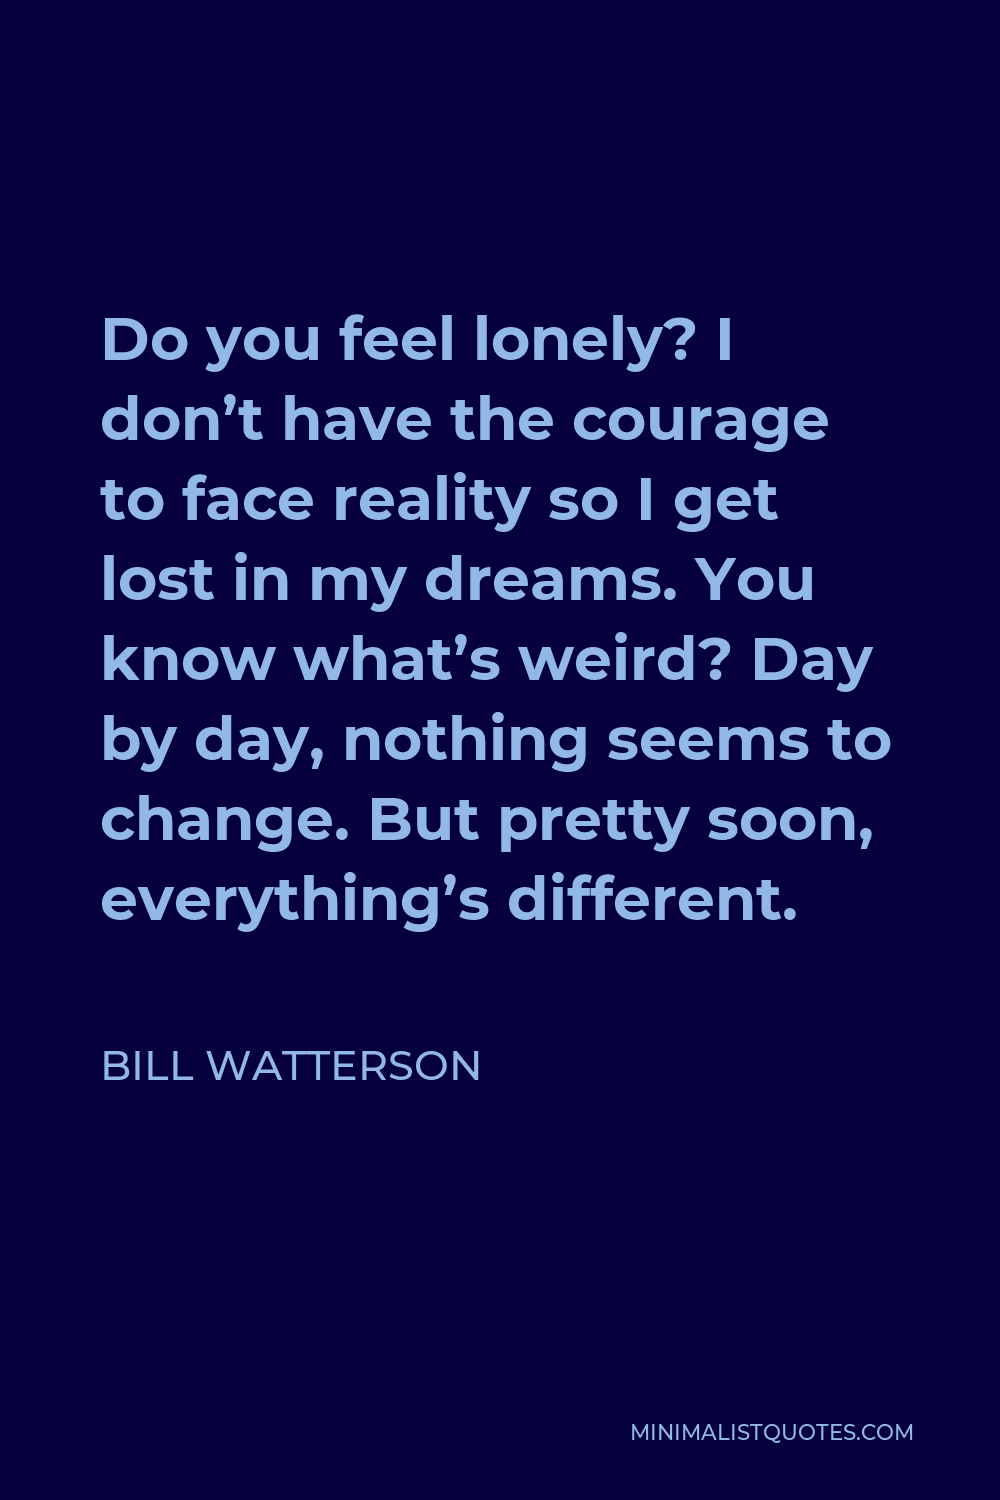 Bill Watterson Quote - Do you feel lonely? I don’t have the courage to face reality so I get lost in my dreams. You know what’s weird? Day by day, nothing seems to change. But pretty soon, everything’s different.